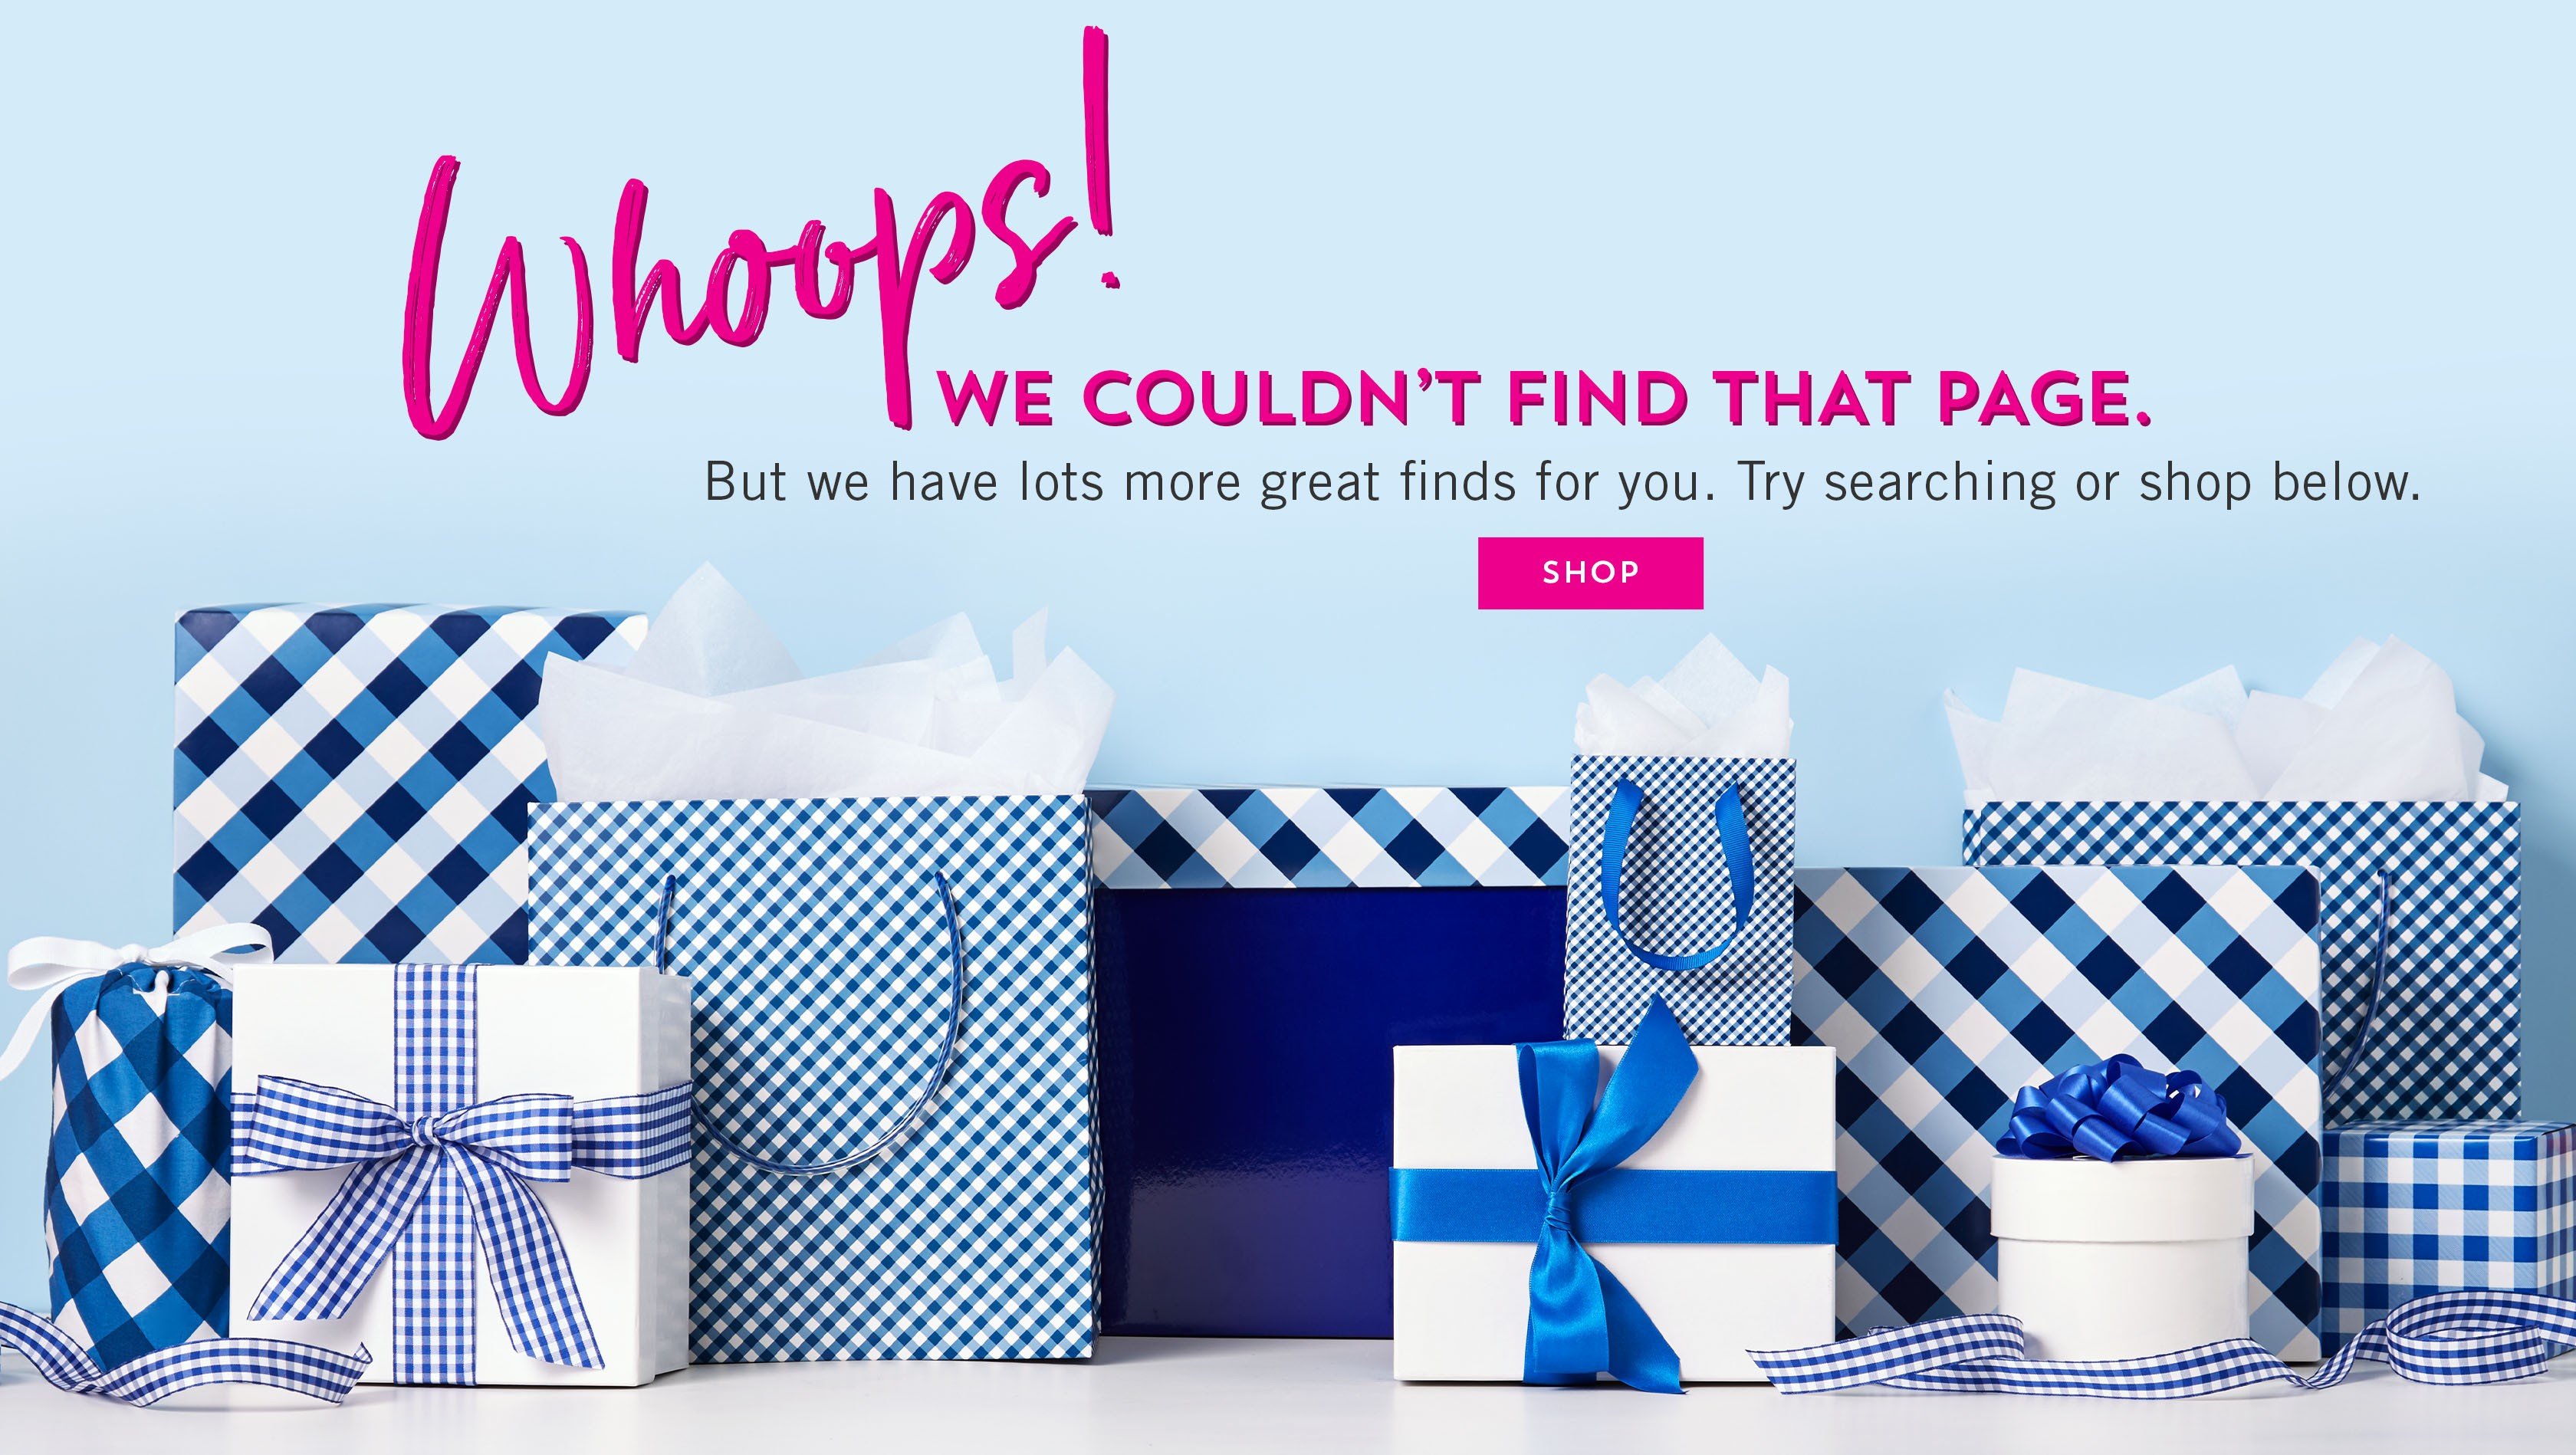 404 error page. Whoops! We couldn't find that page. But we have lots more great finds for you. Try searching or shop below.